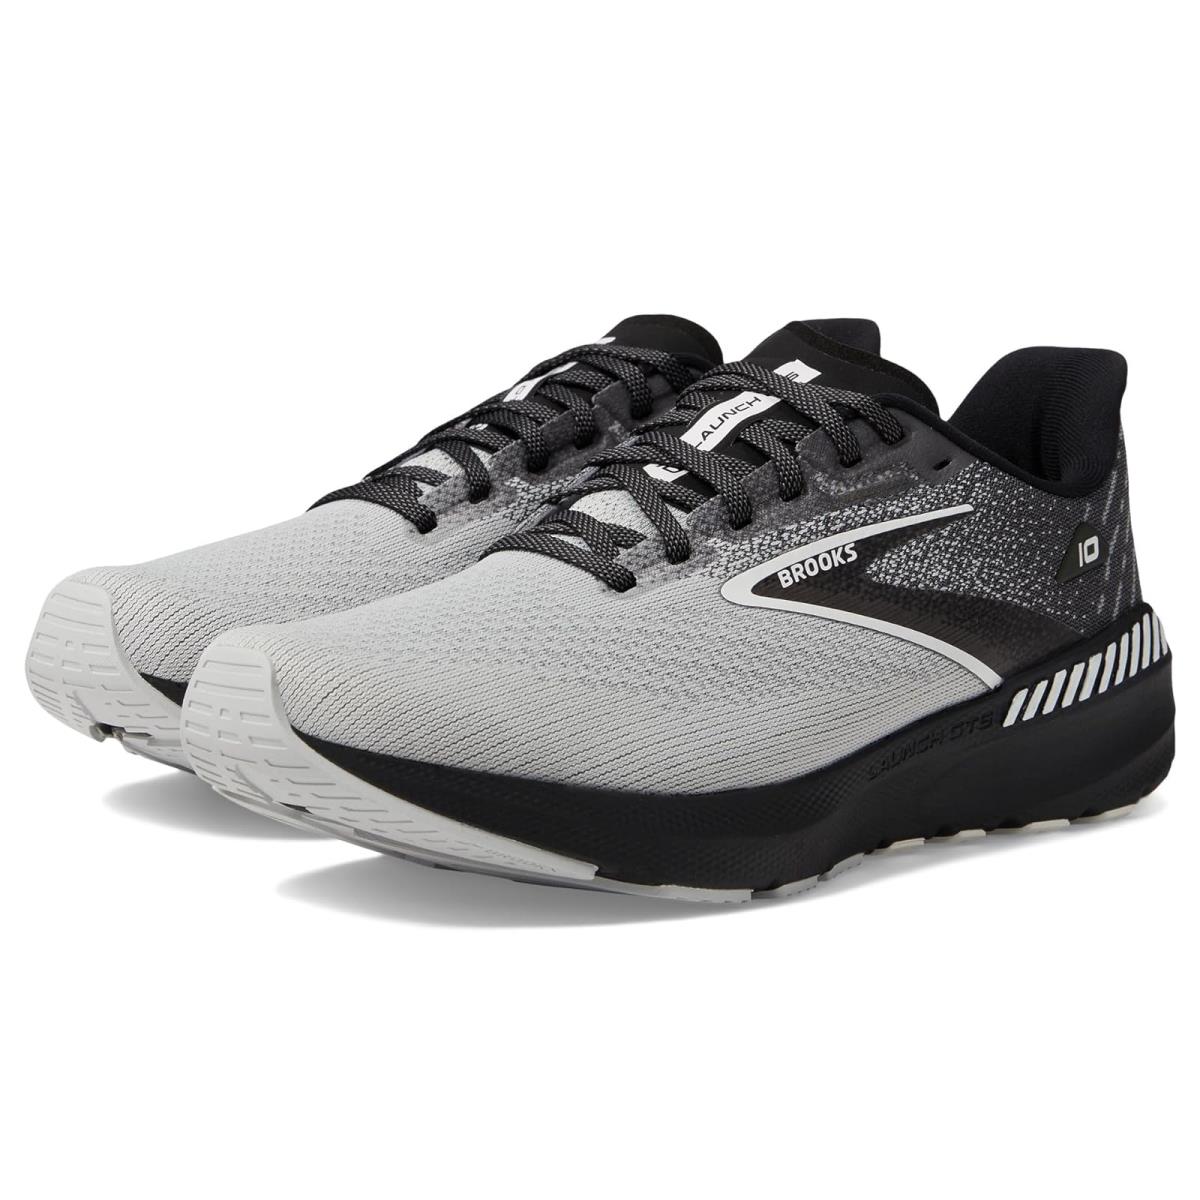 Man`s Sneakers Athletic Shoes Brooks Launch Gts 10 Black/Blackened Pearl/White